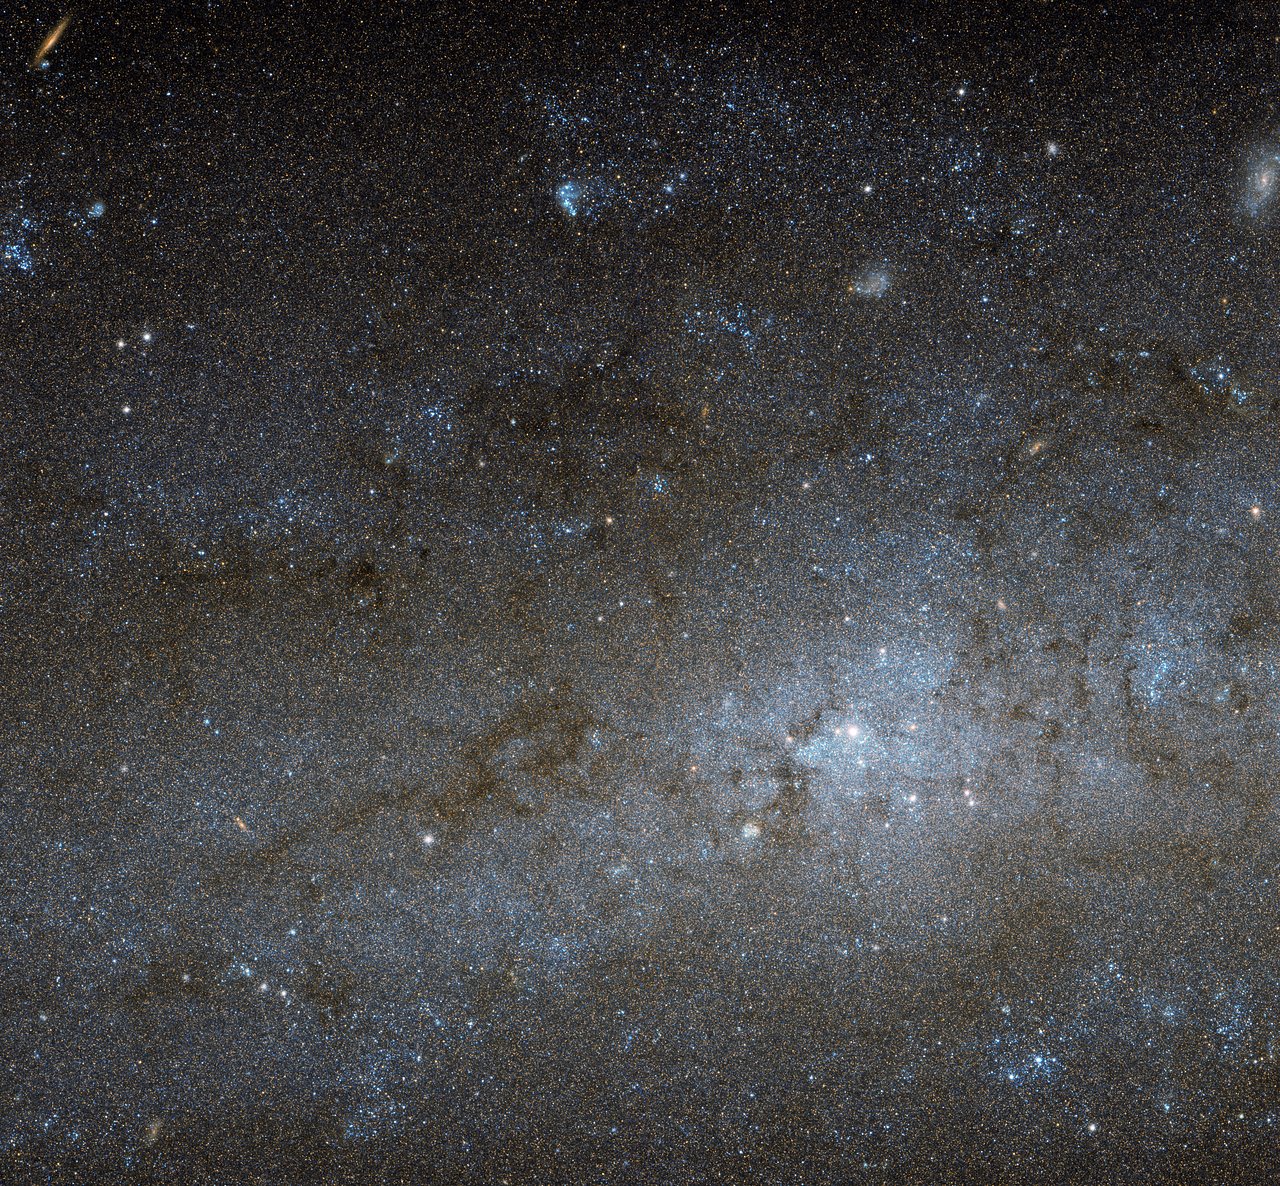 The centre of NGC 247